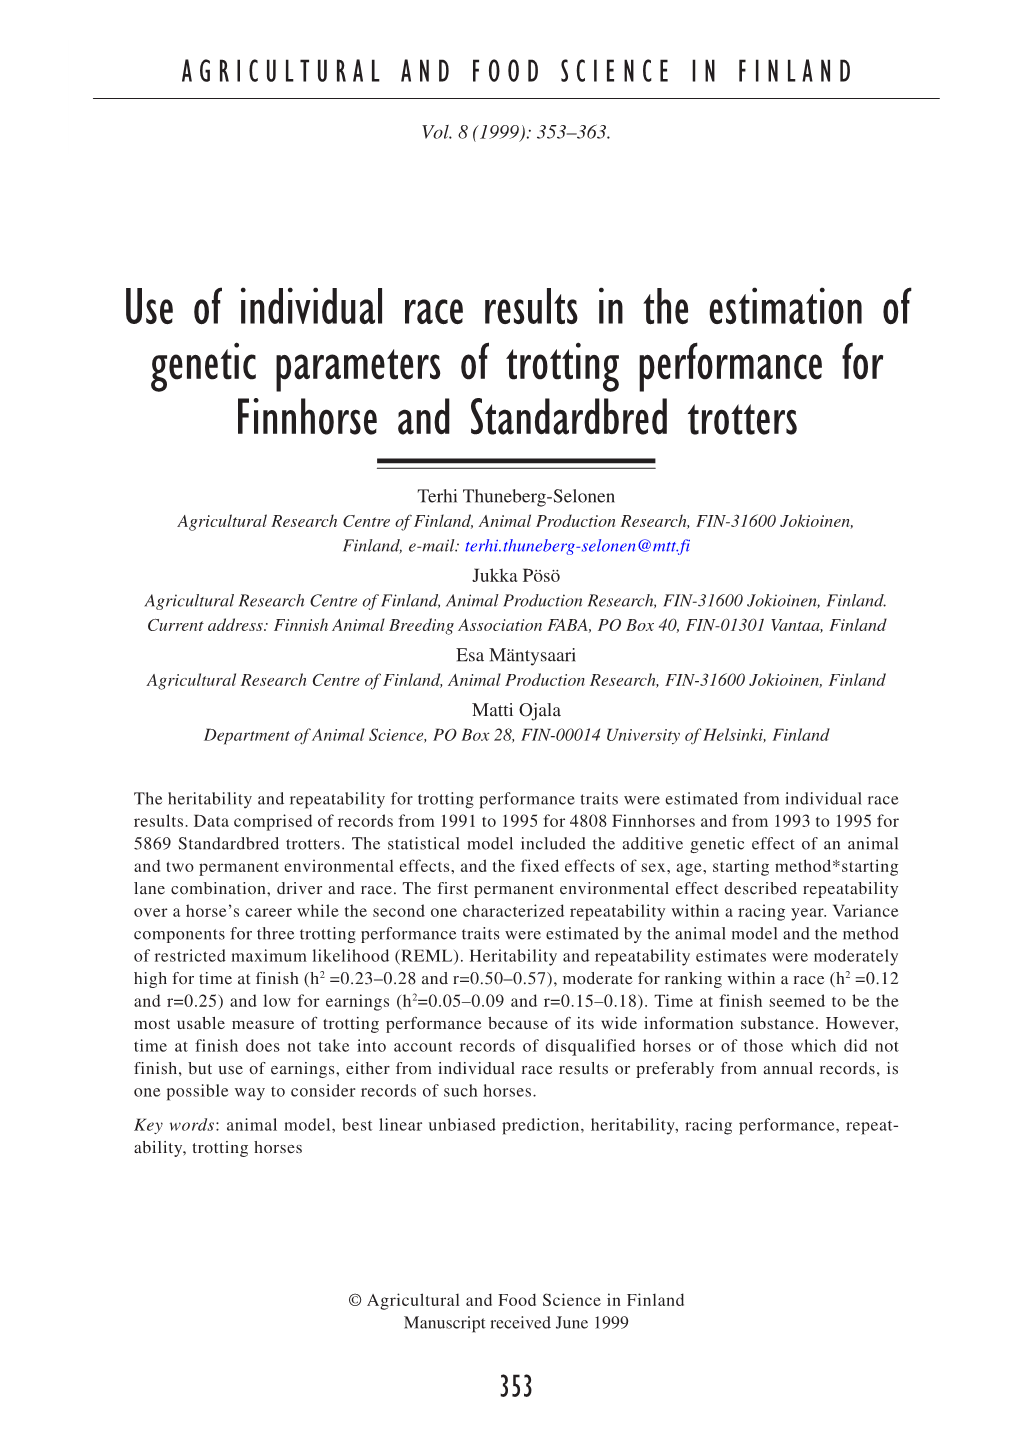 Use of Individual Race Results in the Estimation of Genetic Parameters of Trotting Performance for Finnhorse and Standardbred Trotters